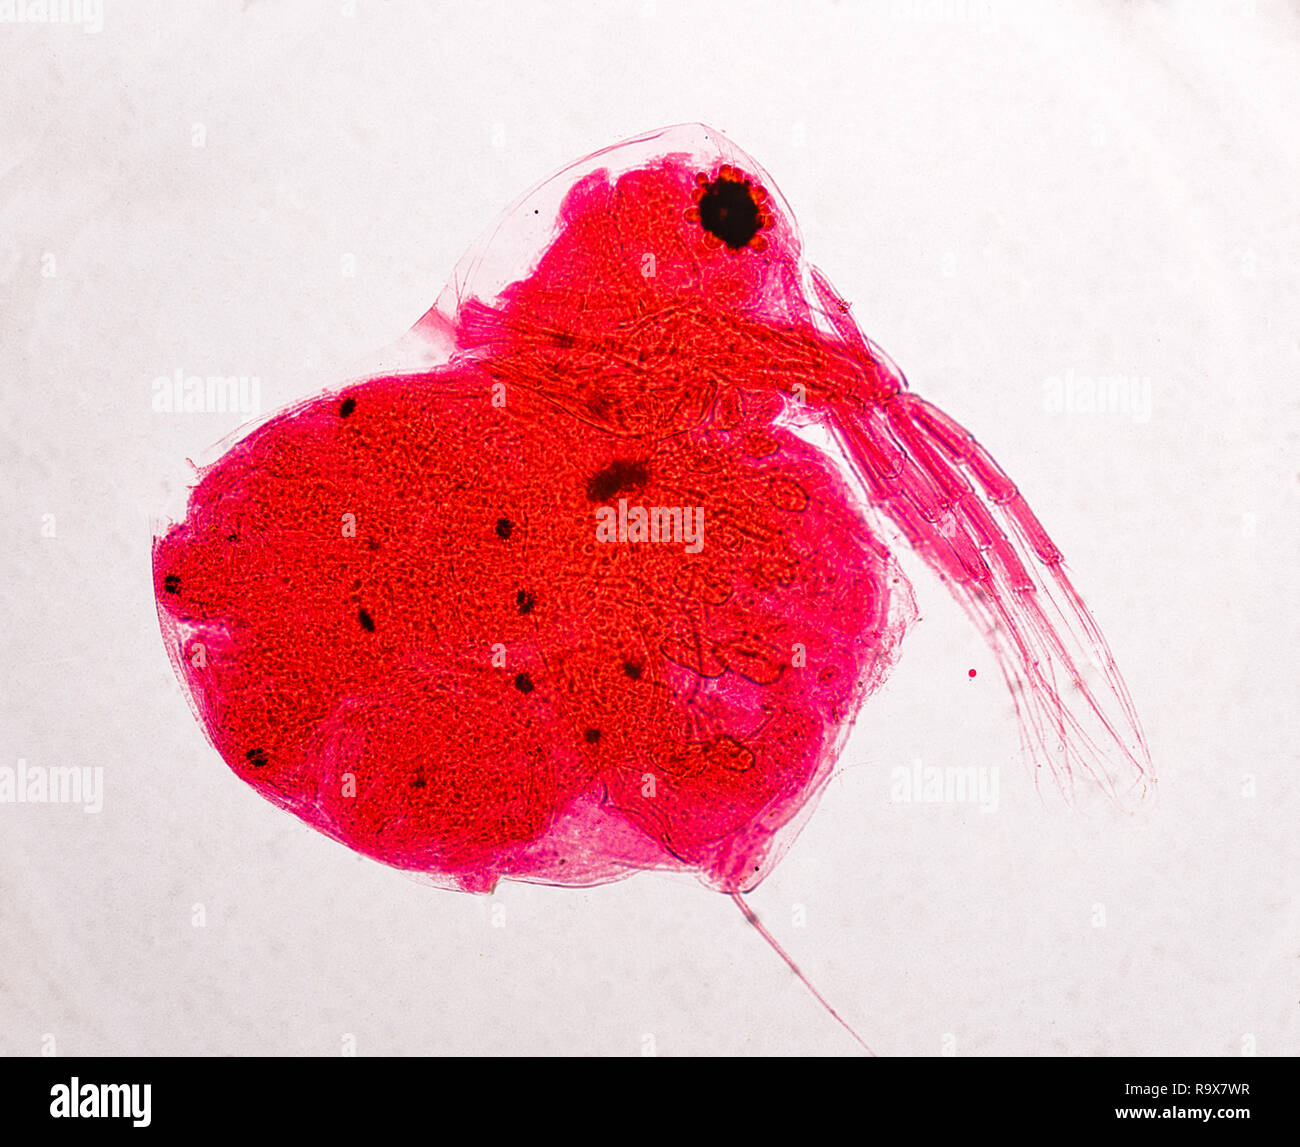 A prepared biology slide with a freshwater water flea magnified and photographed Stock Photo